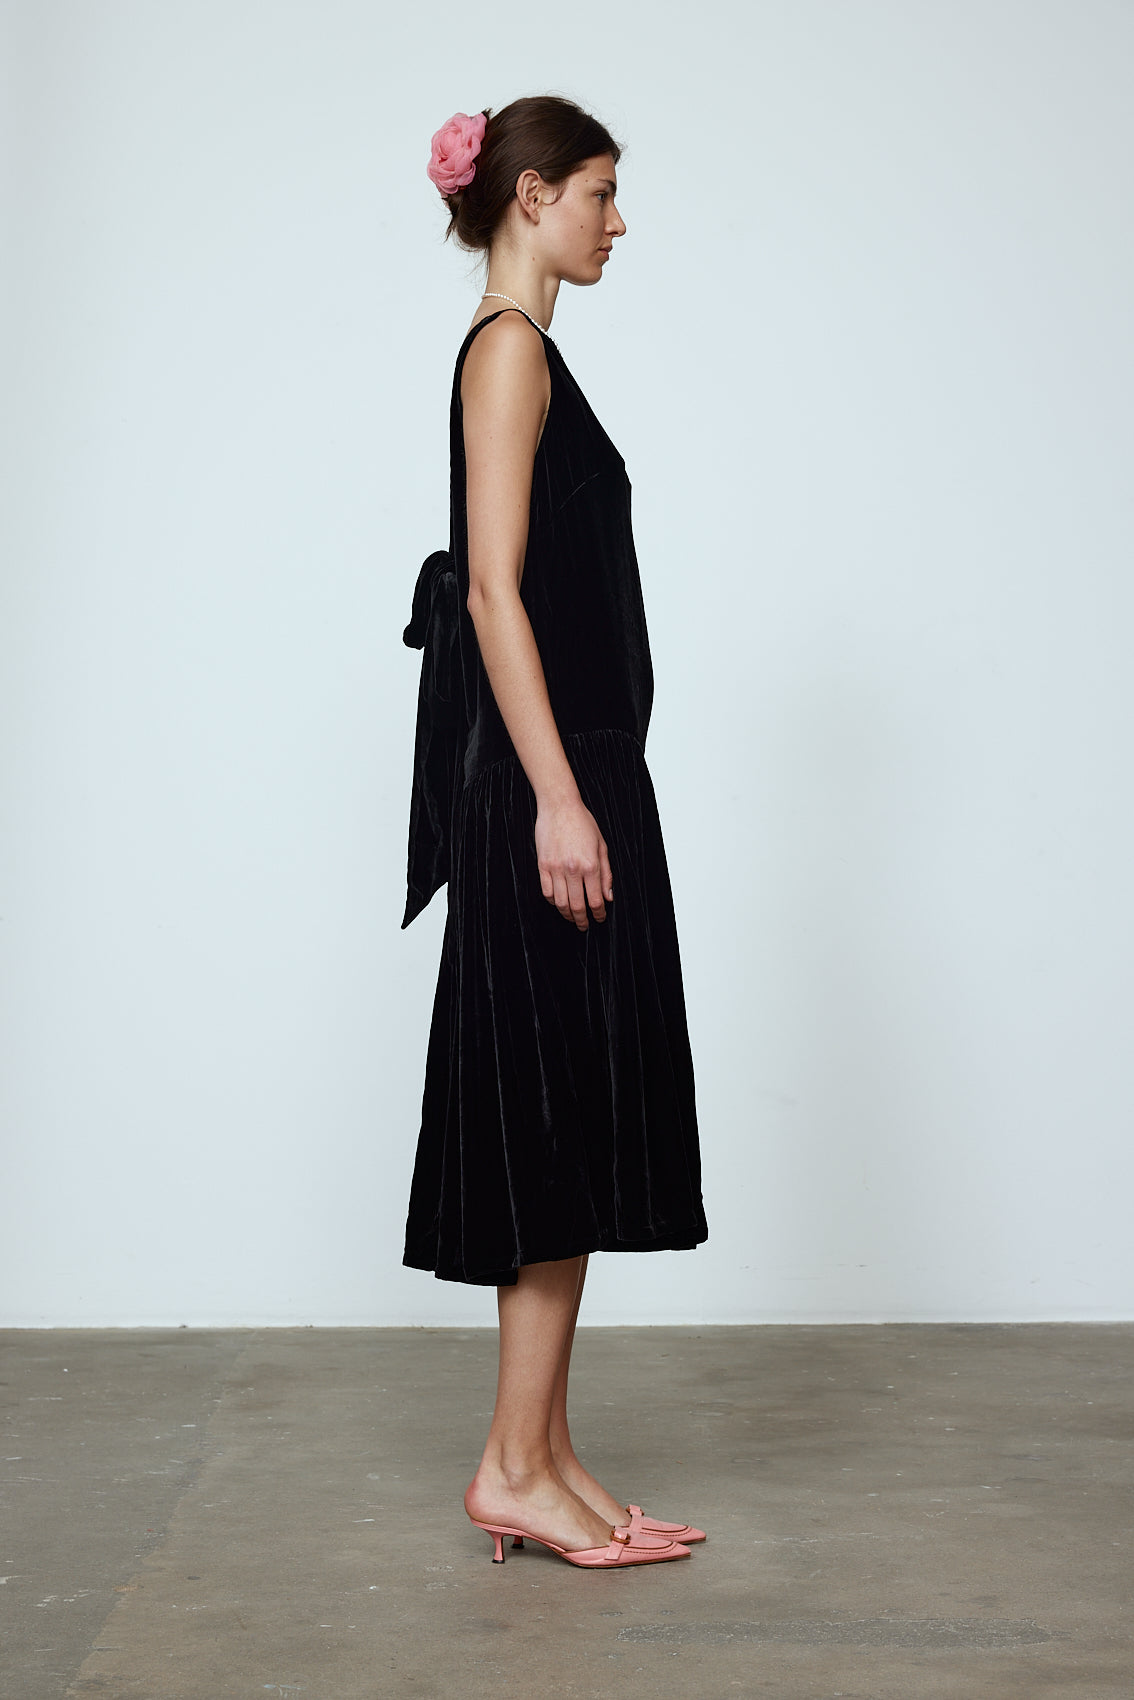 The Sonya Dress is an oversized style with a high neckline and deep back with large bow detail. The dress is made of luxuriously heavy black silk velvet.   Style it with a belt or on its own.  Material: 20% silk, 80% viscose.  The model is 179cm (5'10") and wears size S.